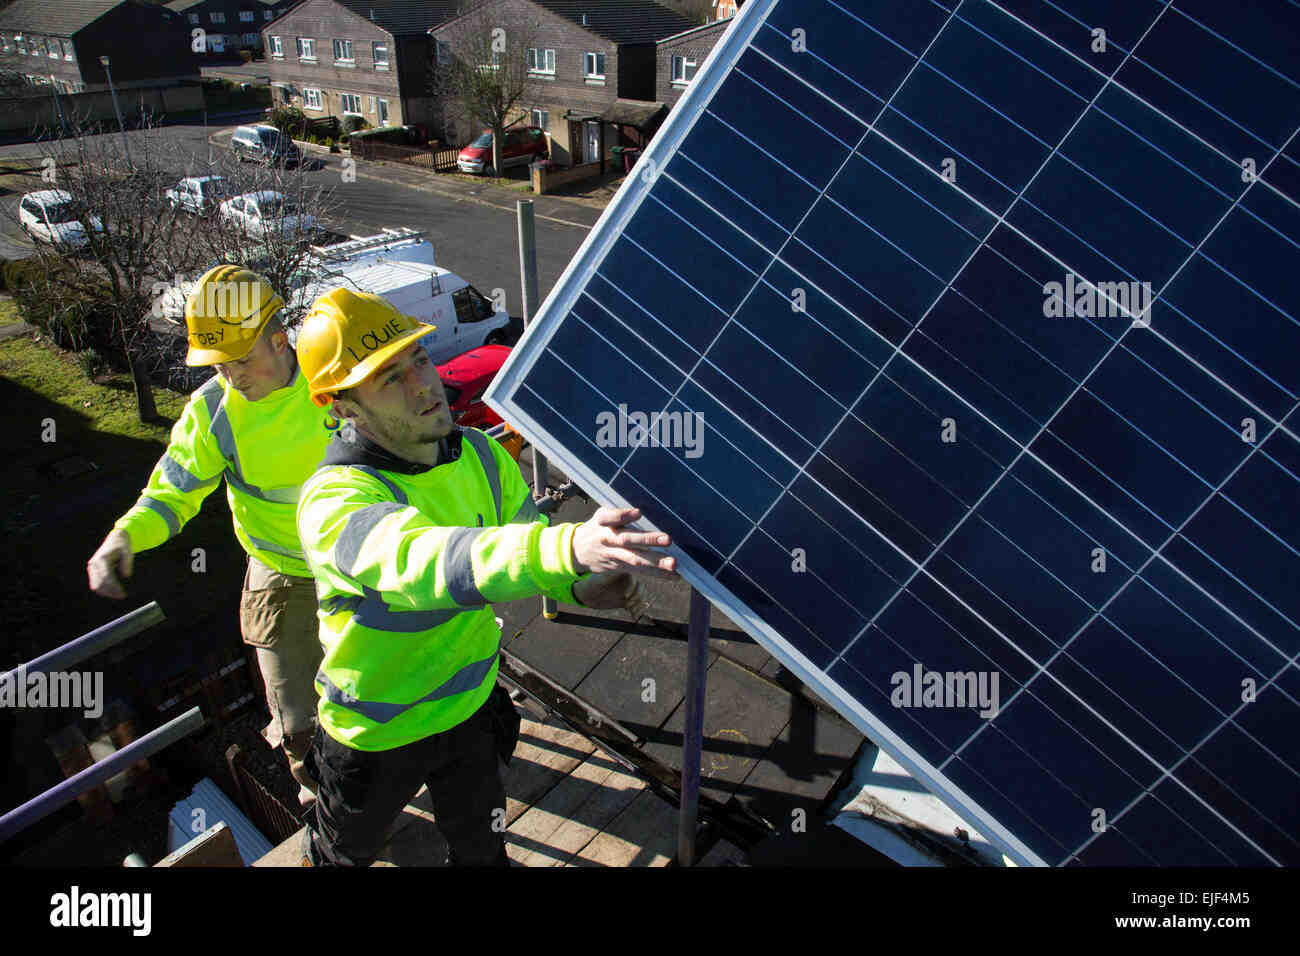 How much does it cost for someone to install solar panels?